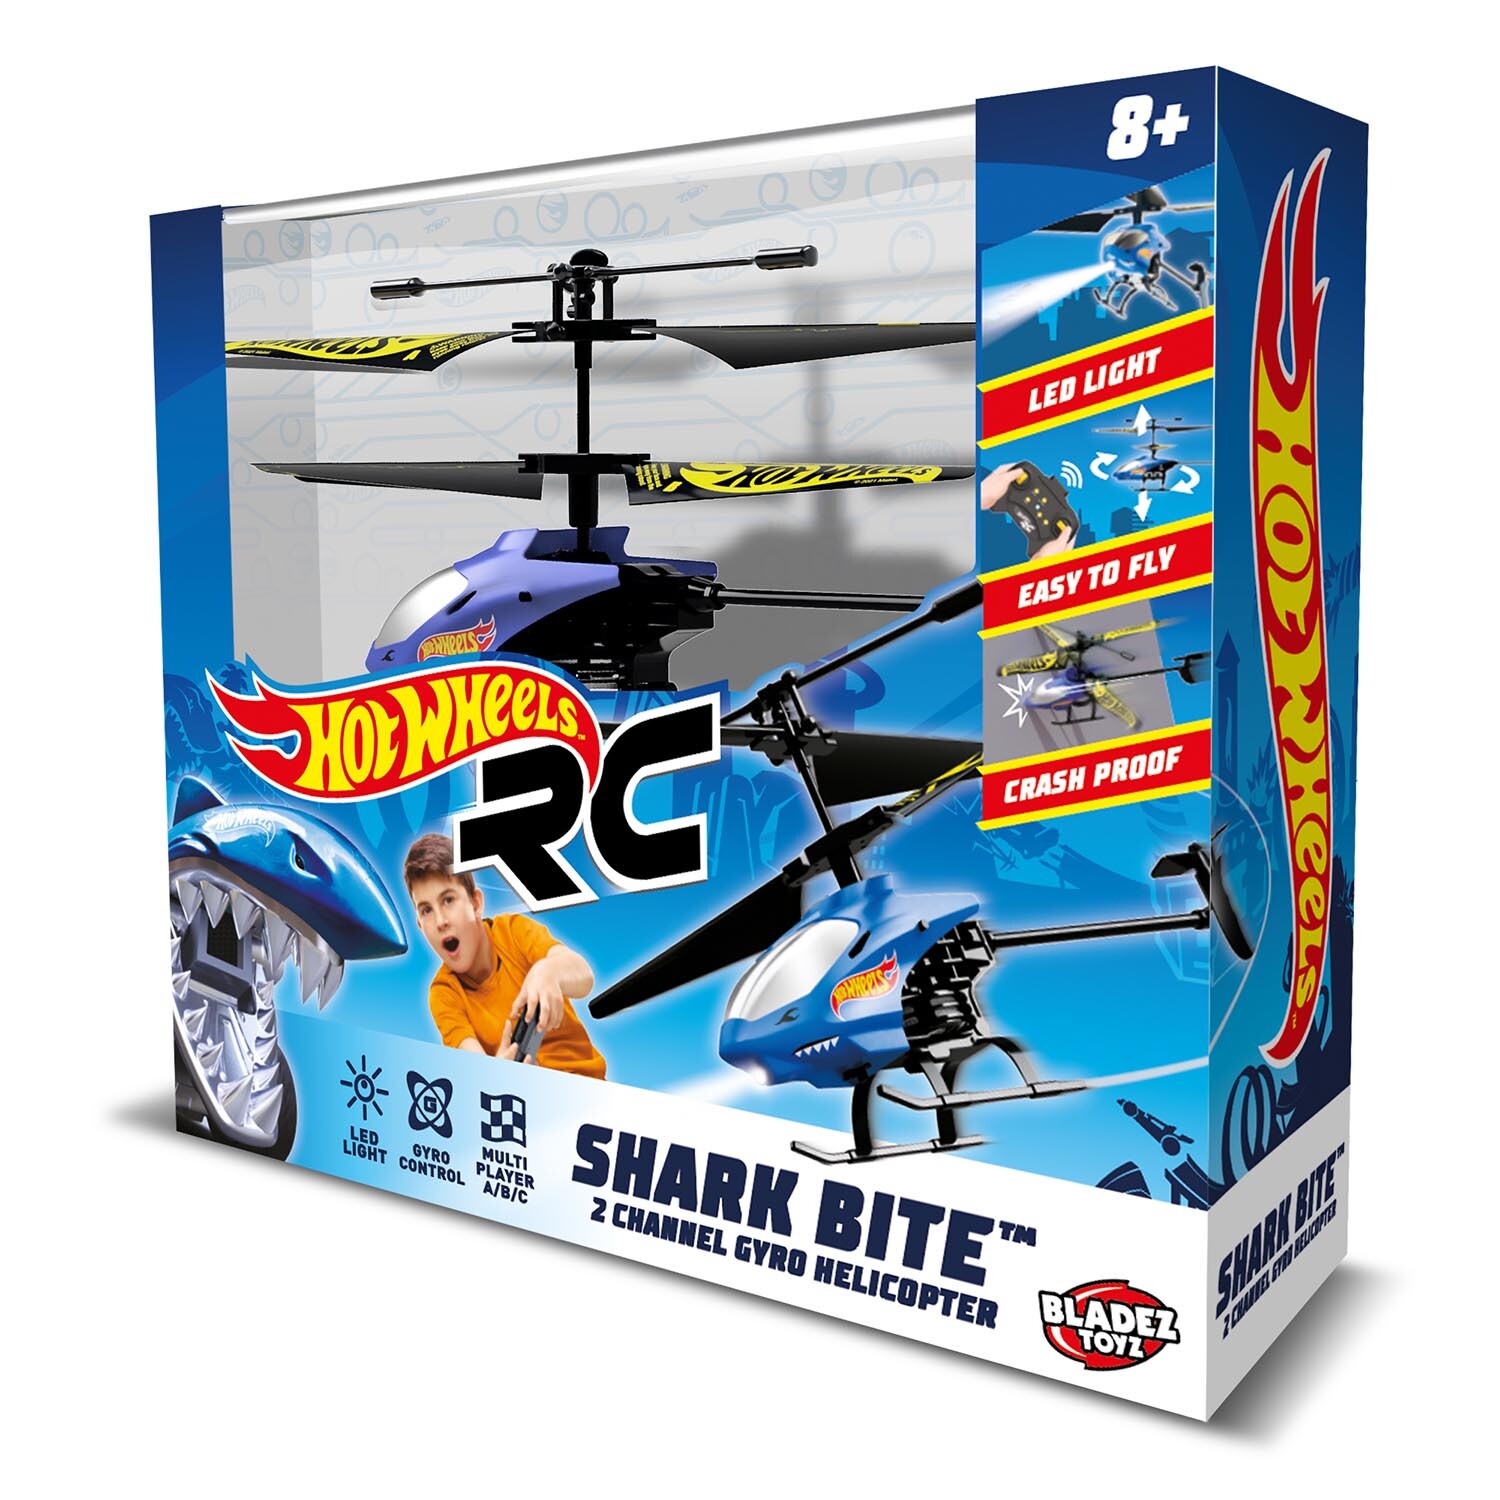 Hot Wheels Shark Bite 2-Channel Gyro Helicopter Blue Image 1